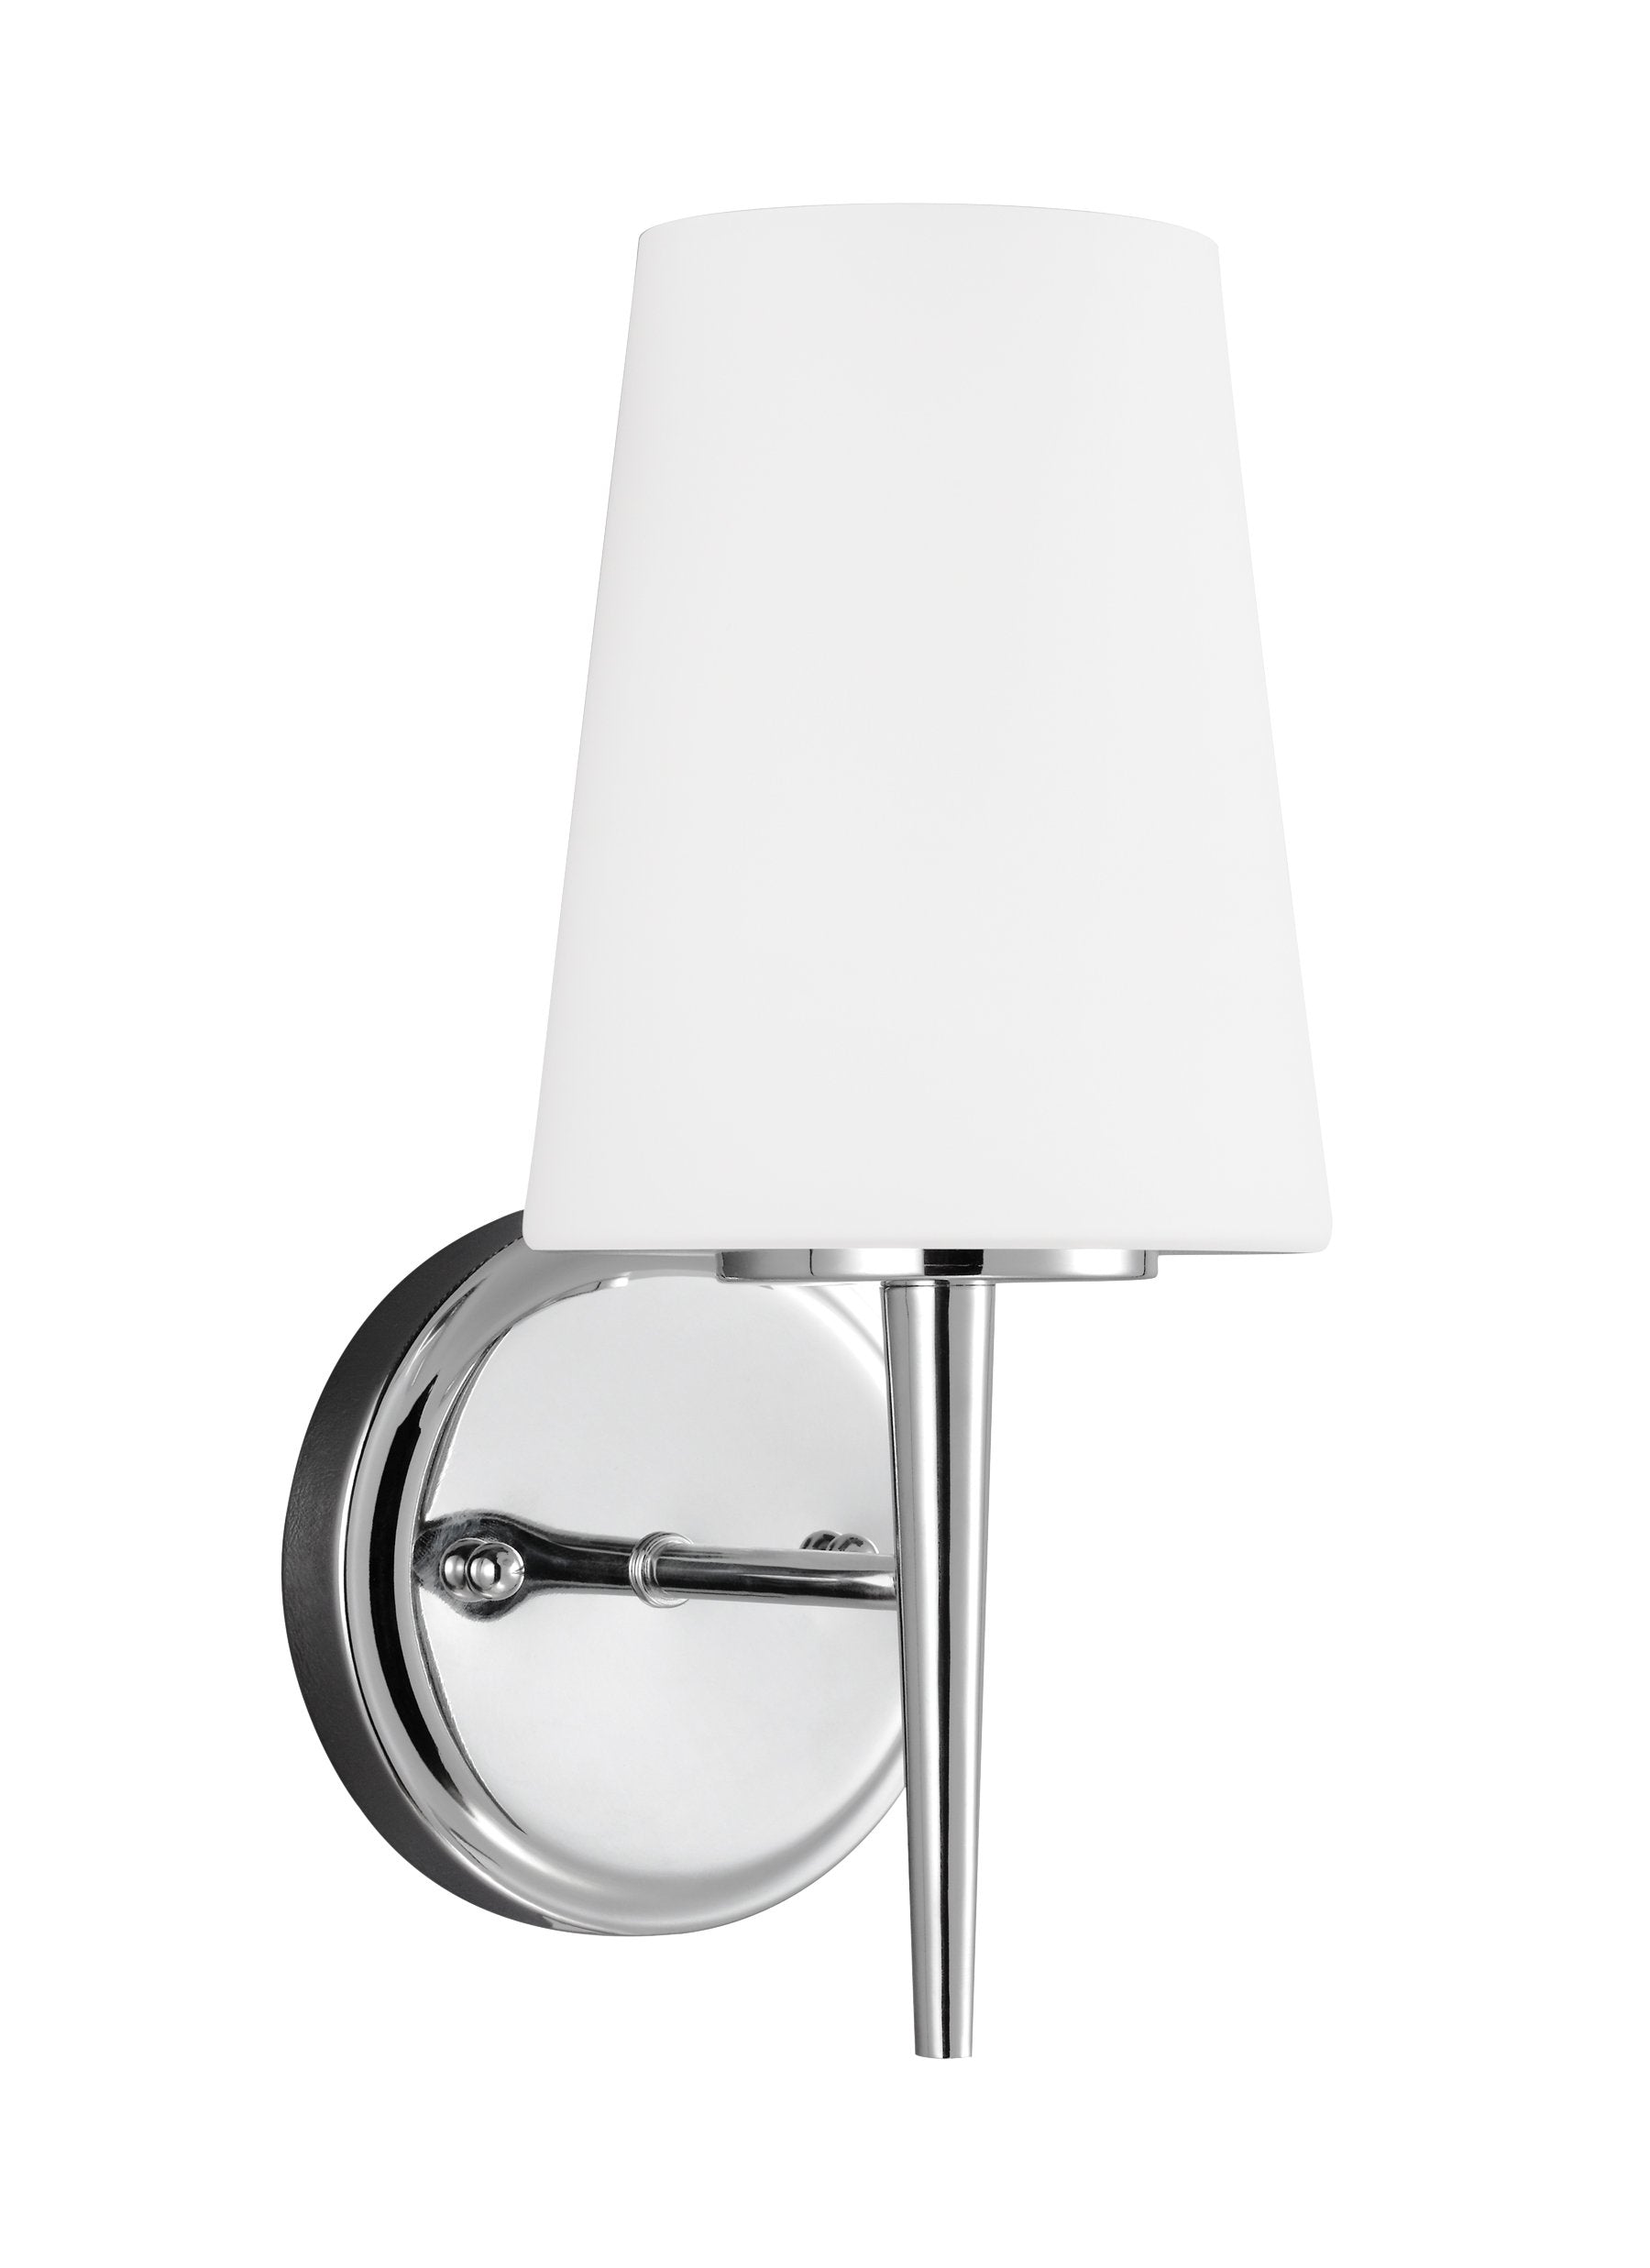 Driscoll One Light Wall Sconce - Chrome Wall Sea Gull Lighting 